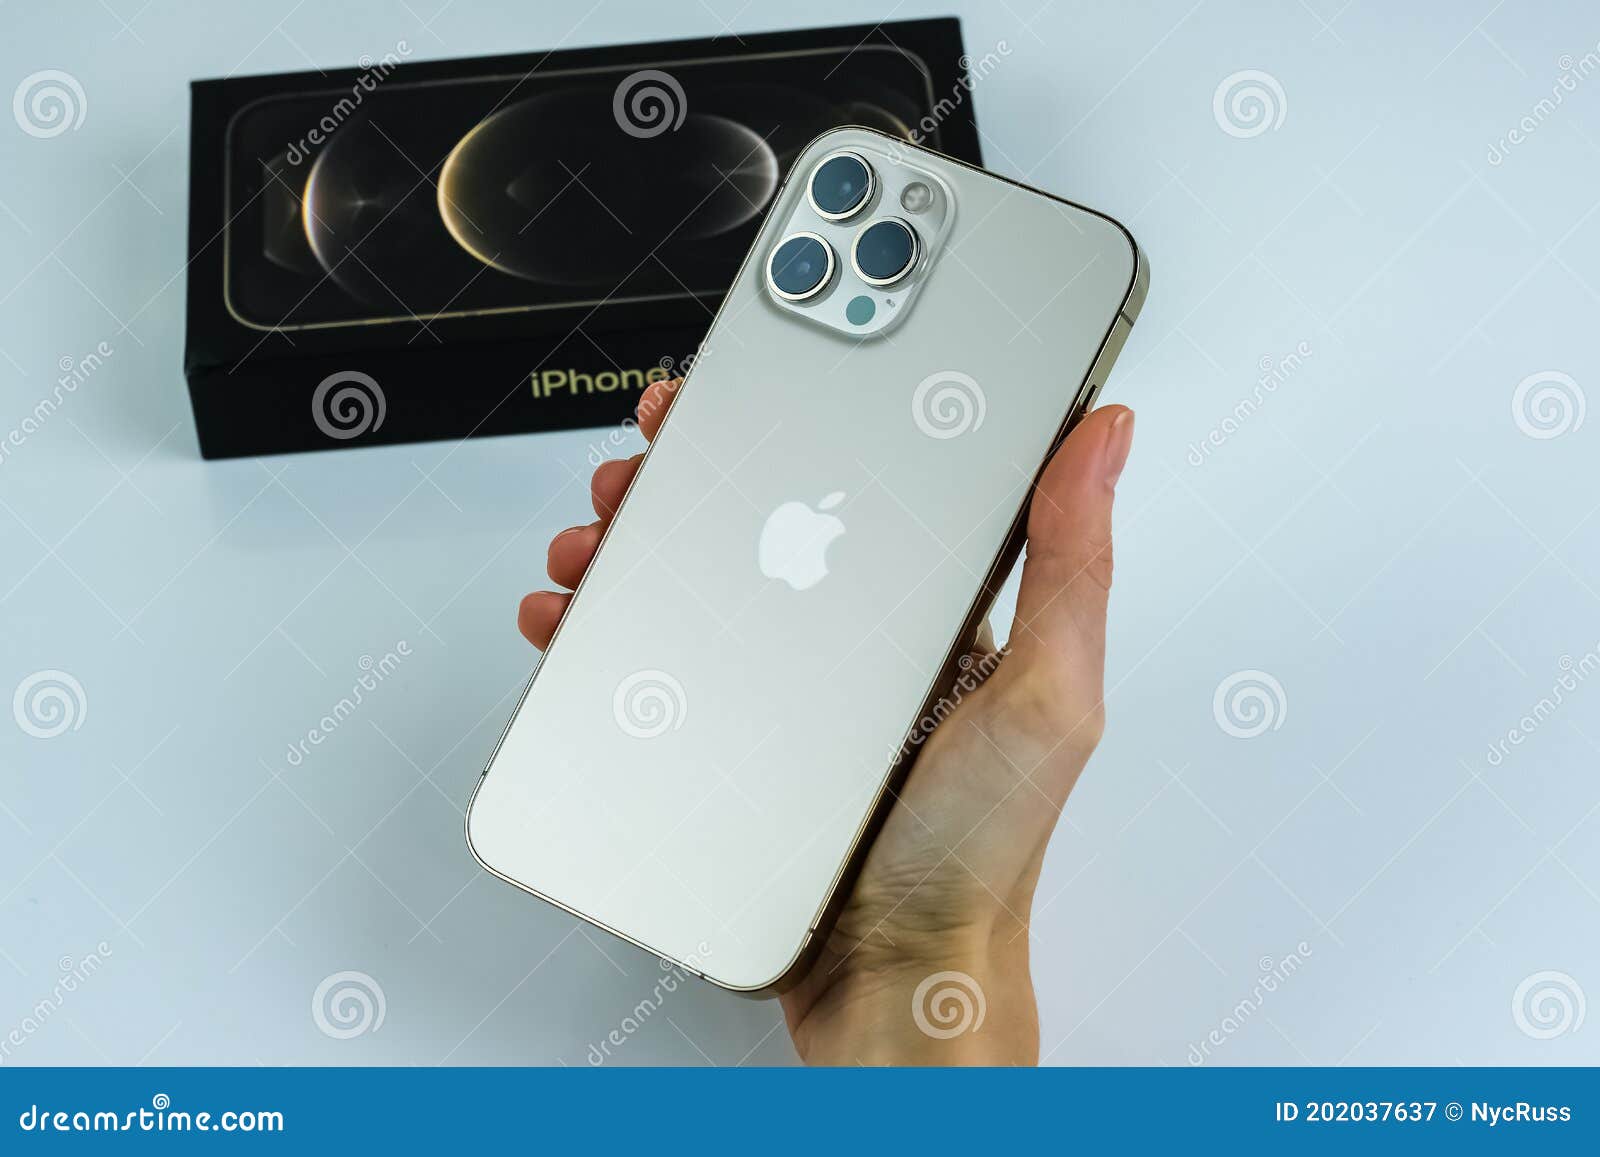 Iphone 12 Pro Max Gold In Customers Hand Editorial Photography Image Of Hands Device